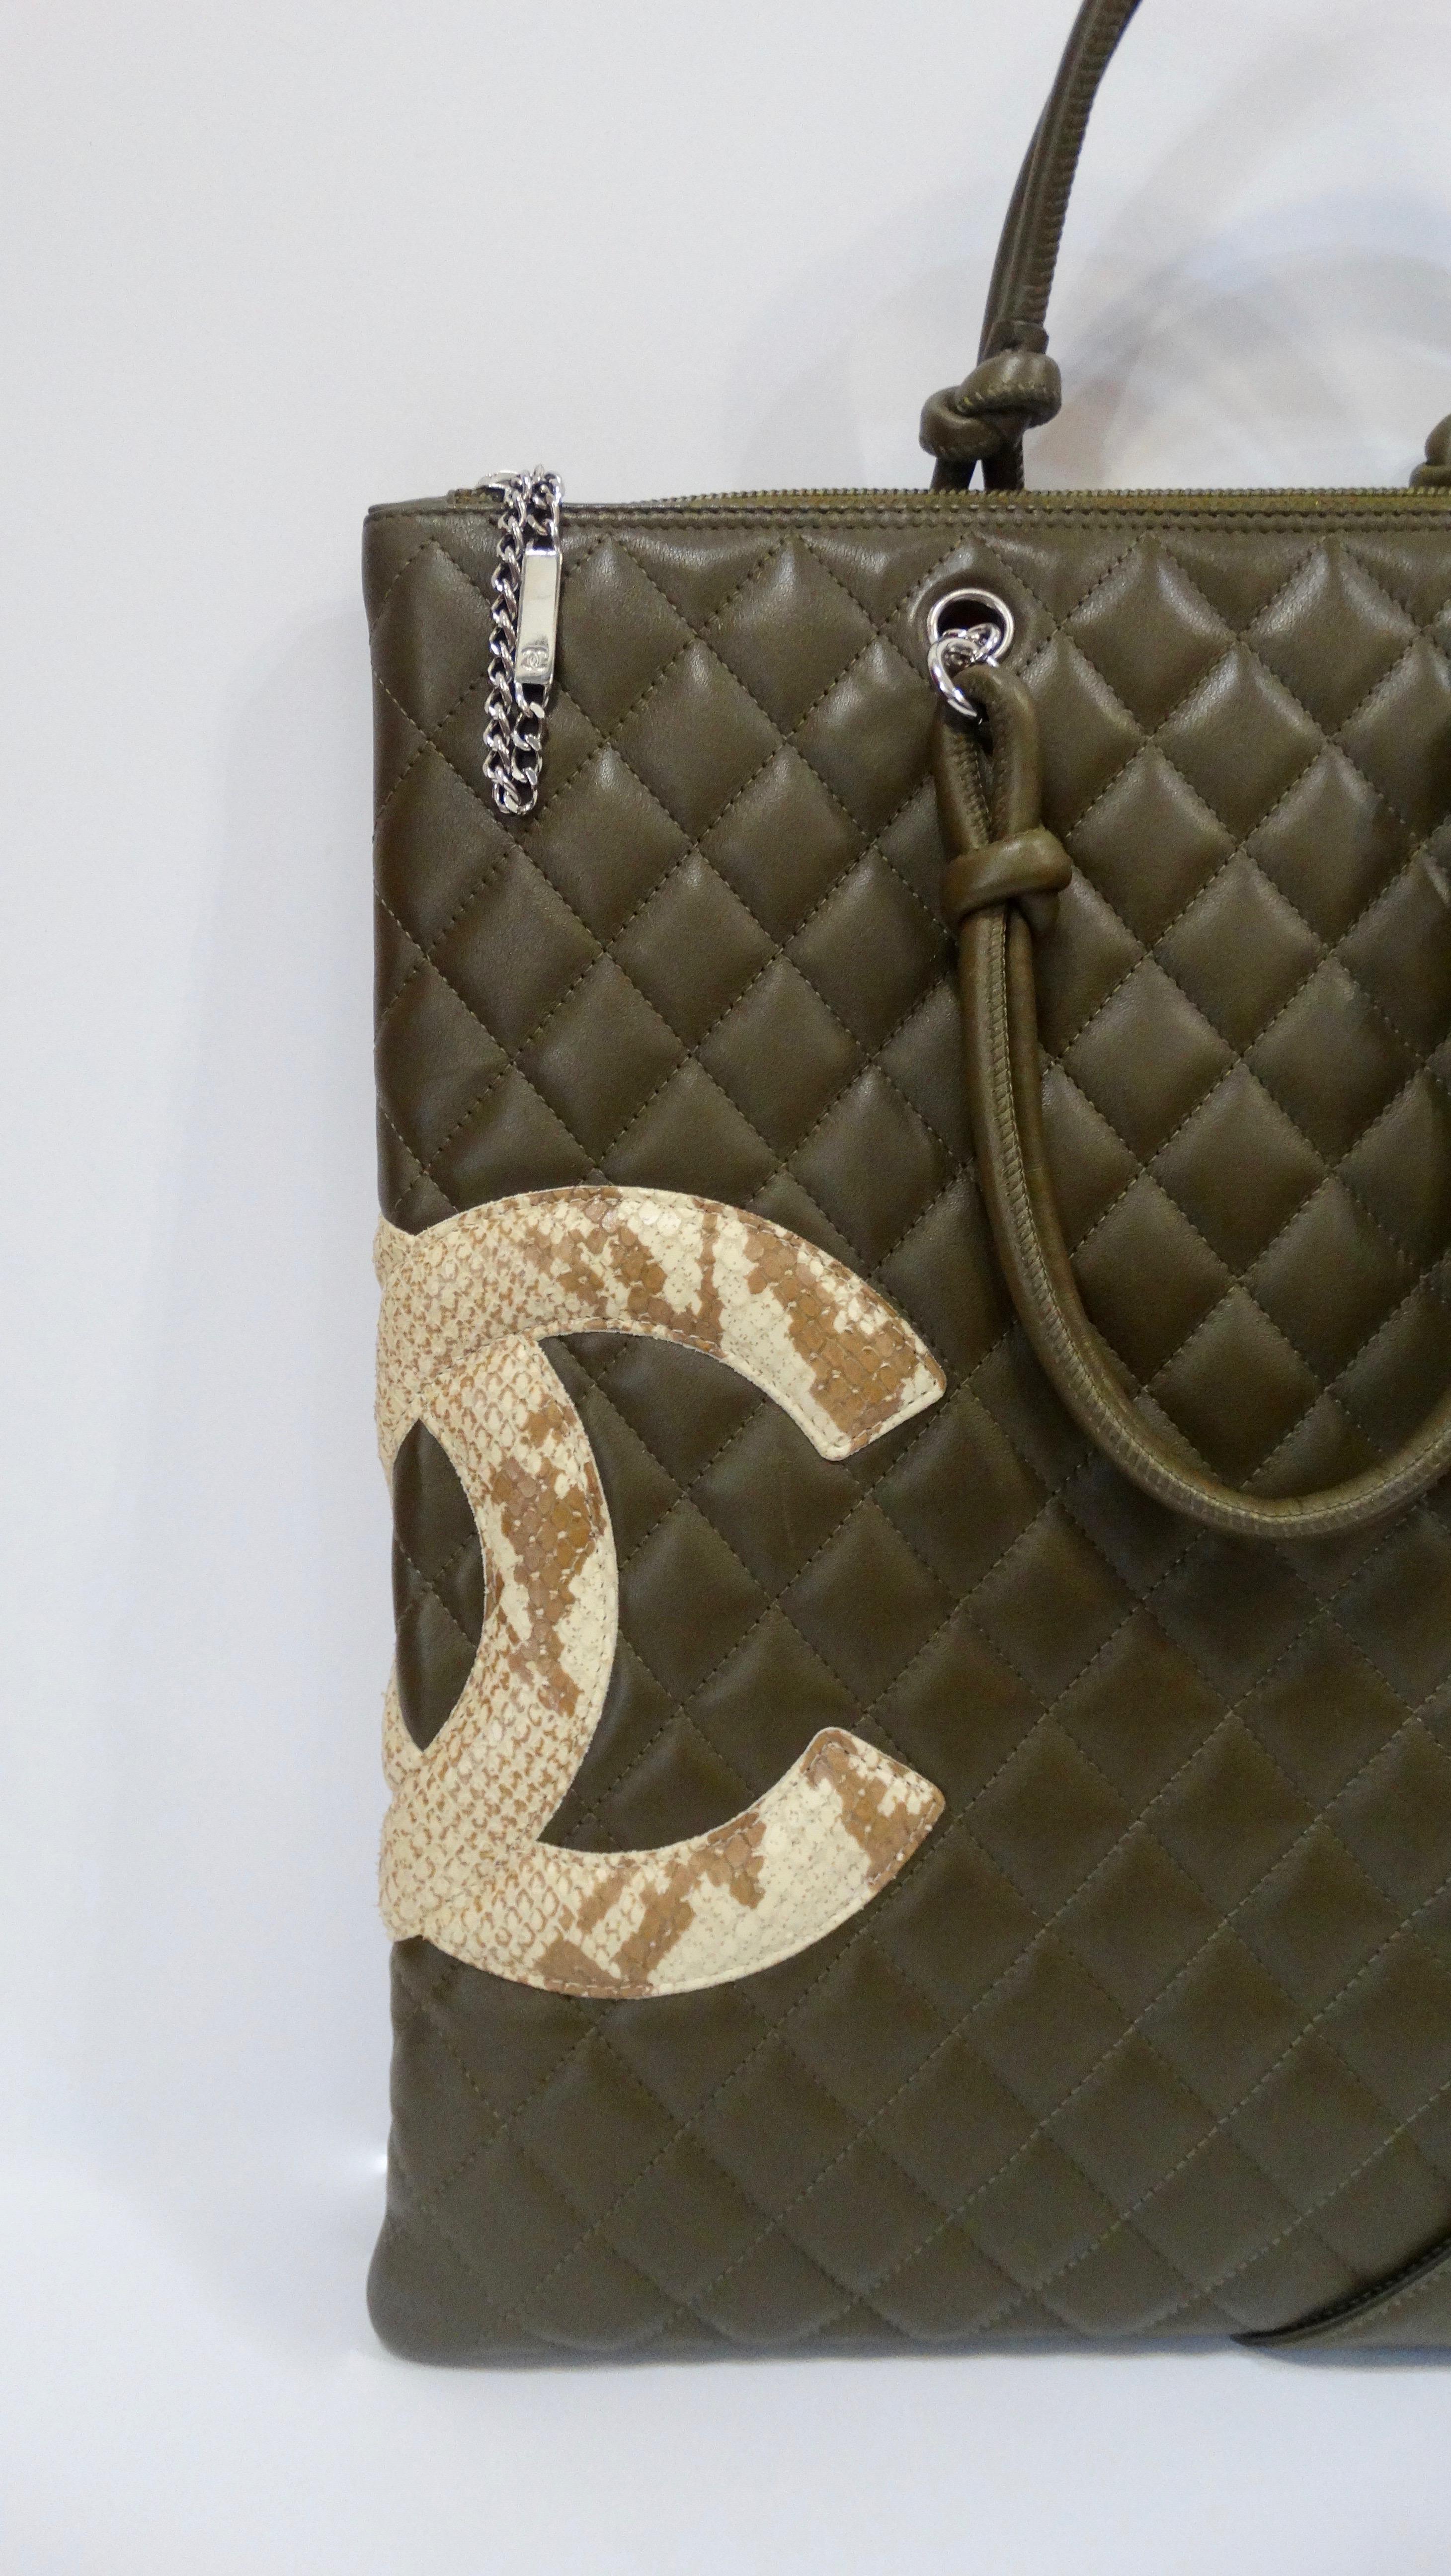 Carry around a piece of Karl Lagerfeld with this Chanel tote bag! Circa 2005, this Chanel Cambon tote bag is made of soft olive green lambskin leather and is stitched with Chanel's signature quilting pattern. Features dual knot rolled top handles,